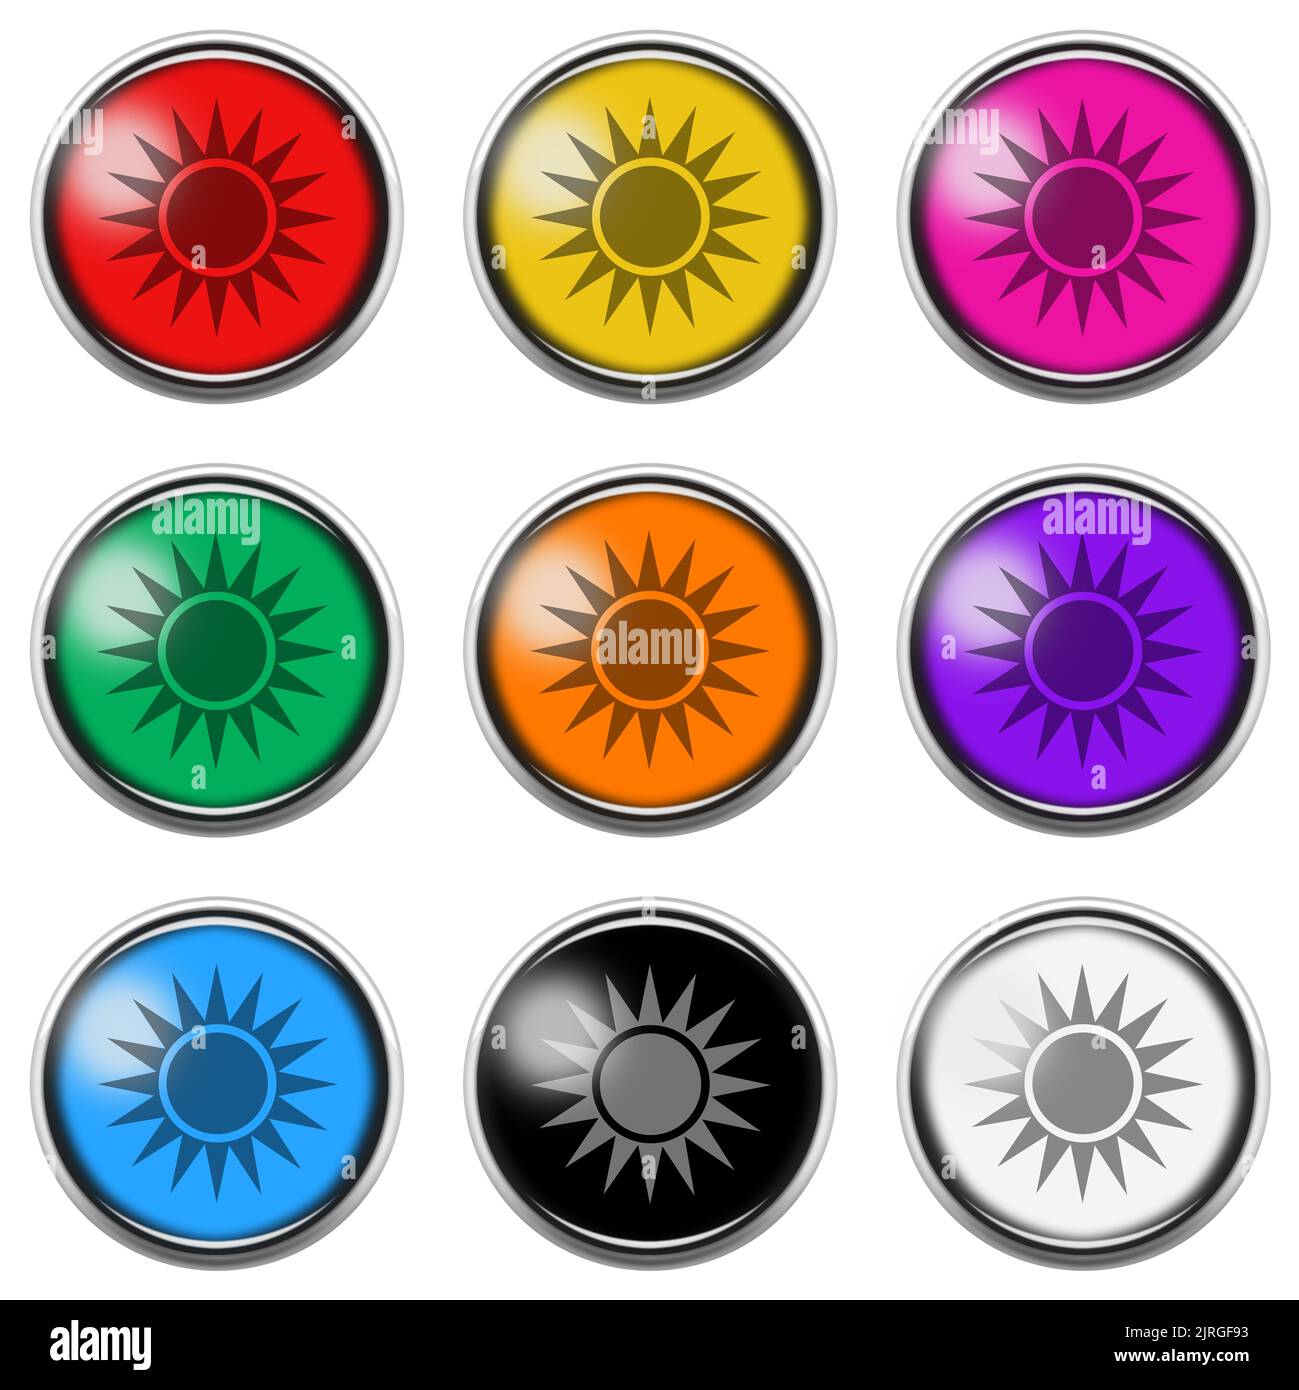 Sun button icon set isolated on white with clipping path 3d illustration Stock Photo